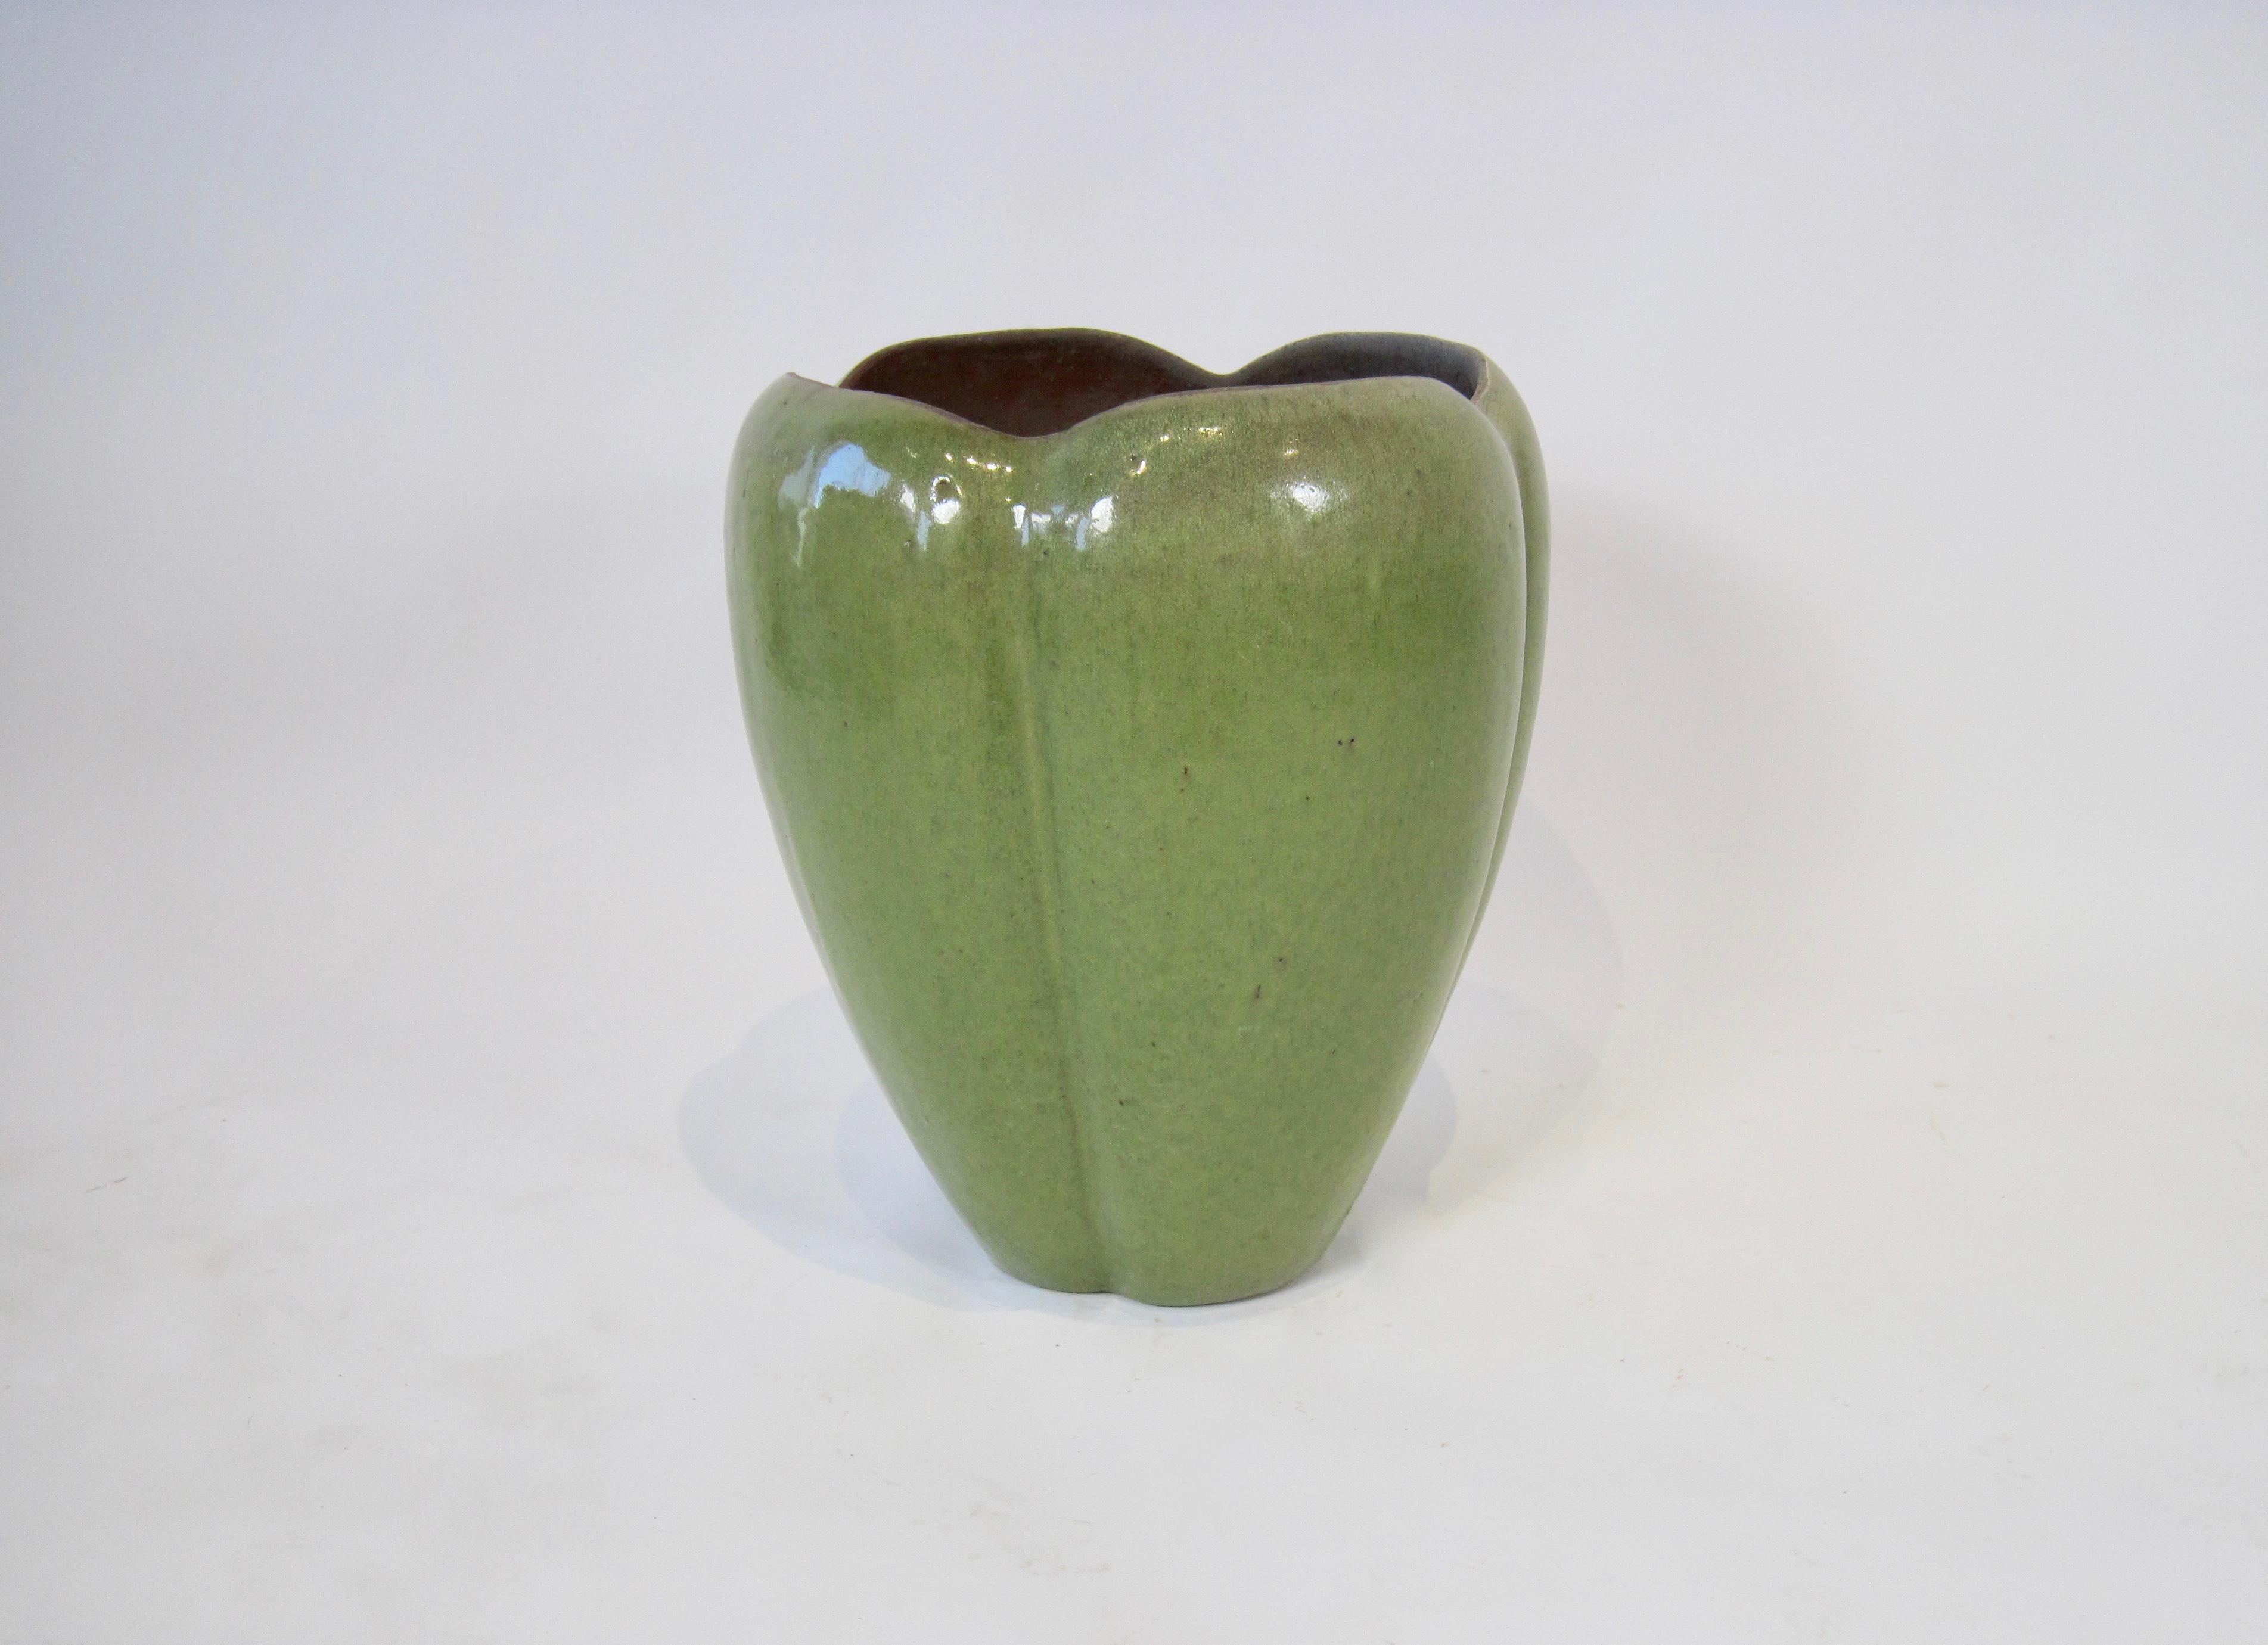 An arts & crafts style flower bud earthenware jardinière. Four green glazed petal like sections widen upwards and curve slightly inward at the top. This planter is substantial in weight and form.